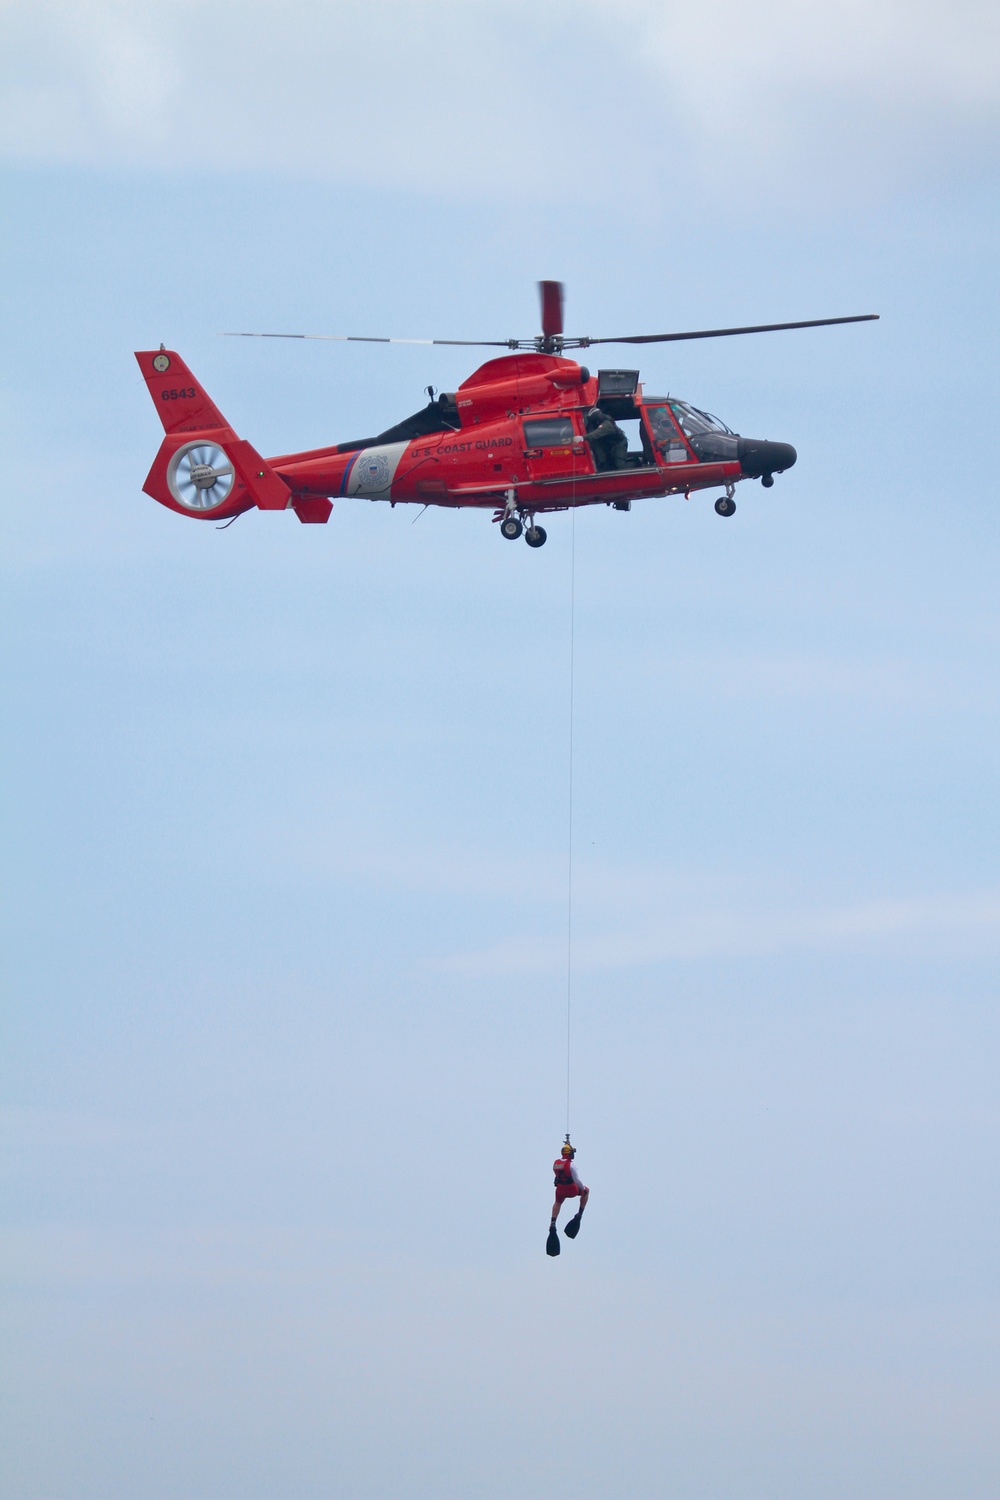 177th Fighter Wing and US Coast Guard joint rescue training